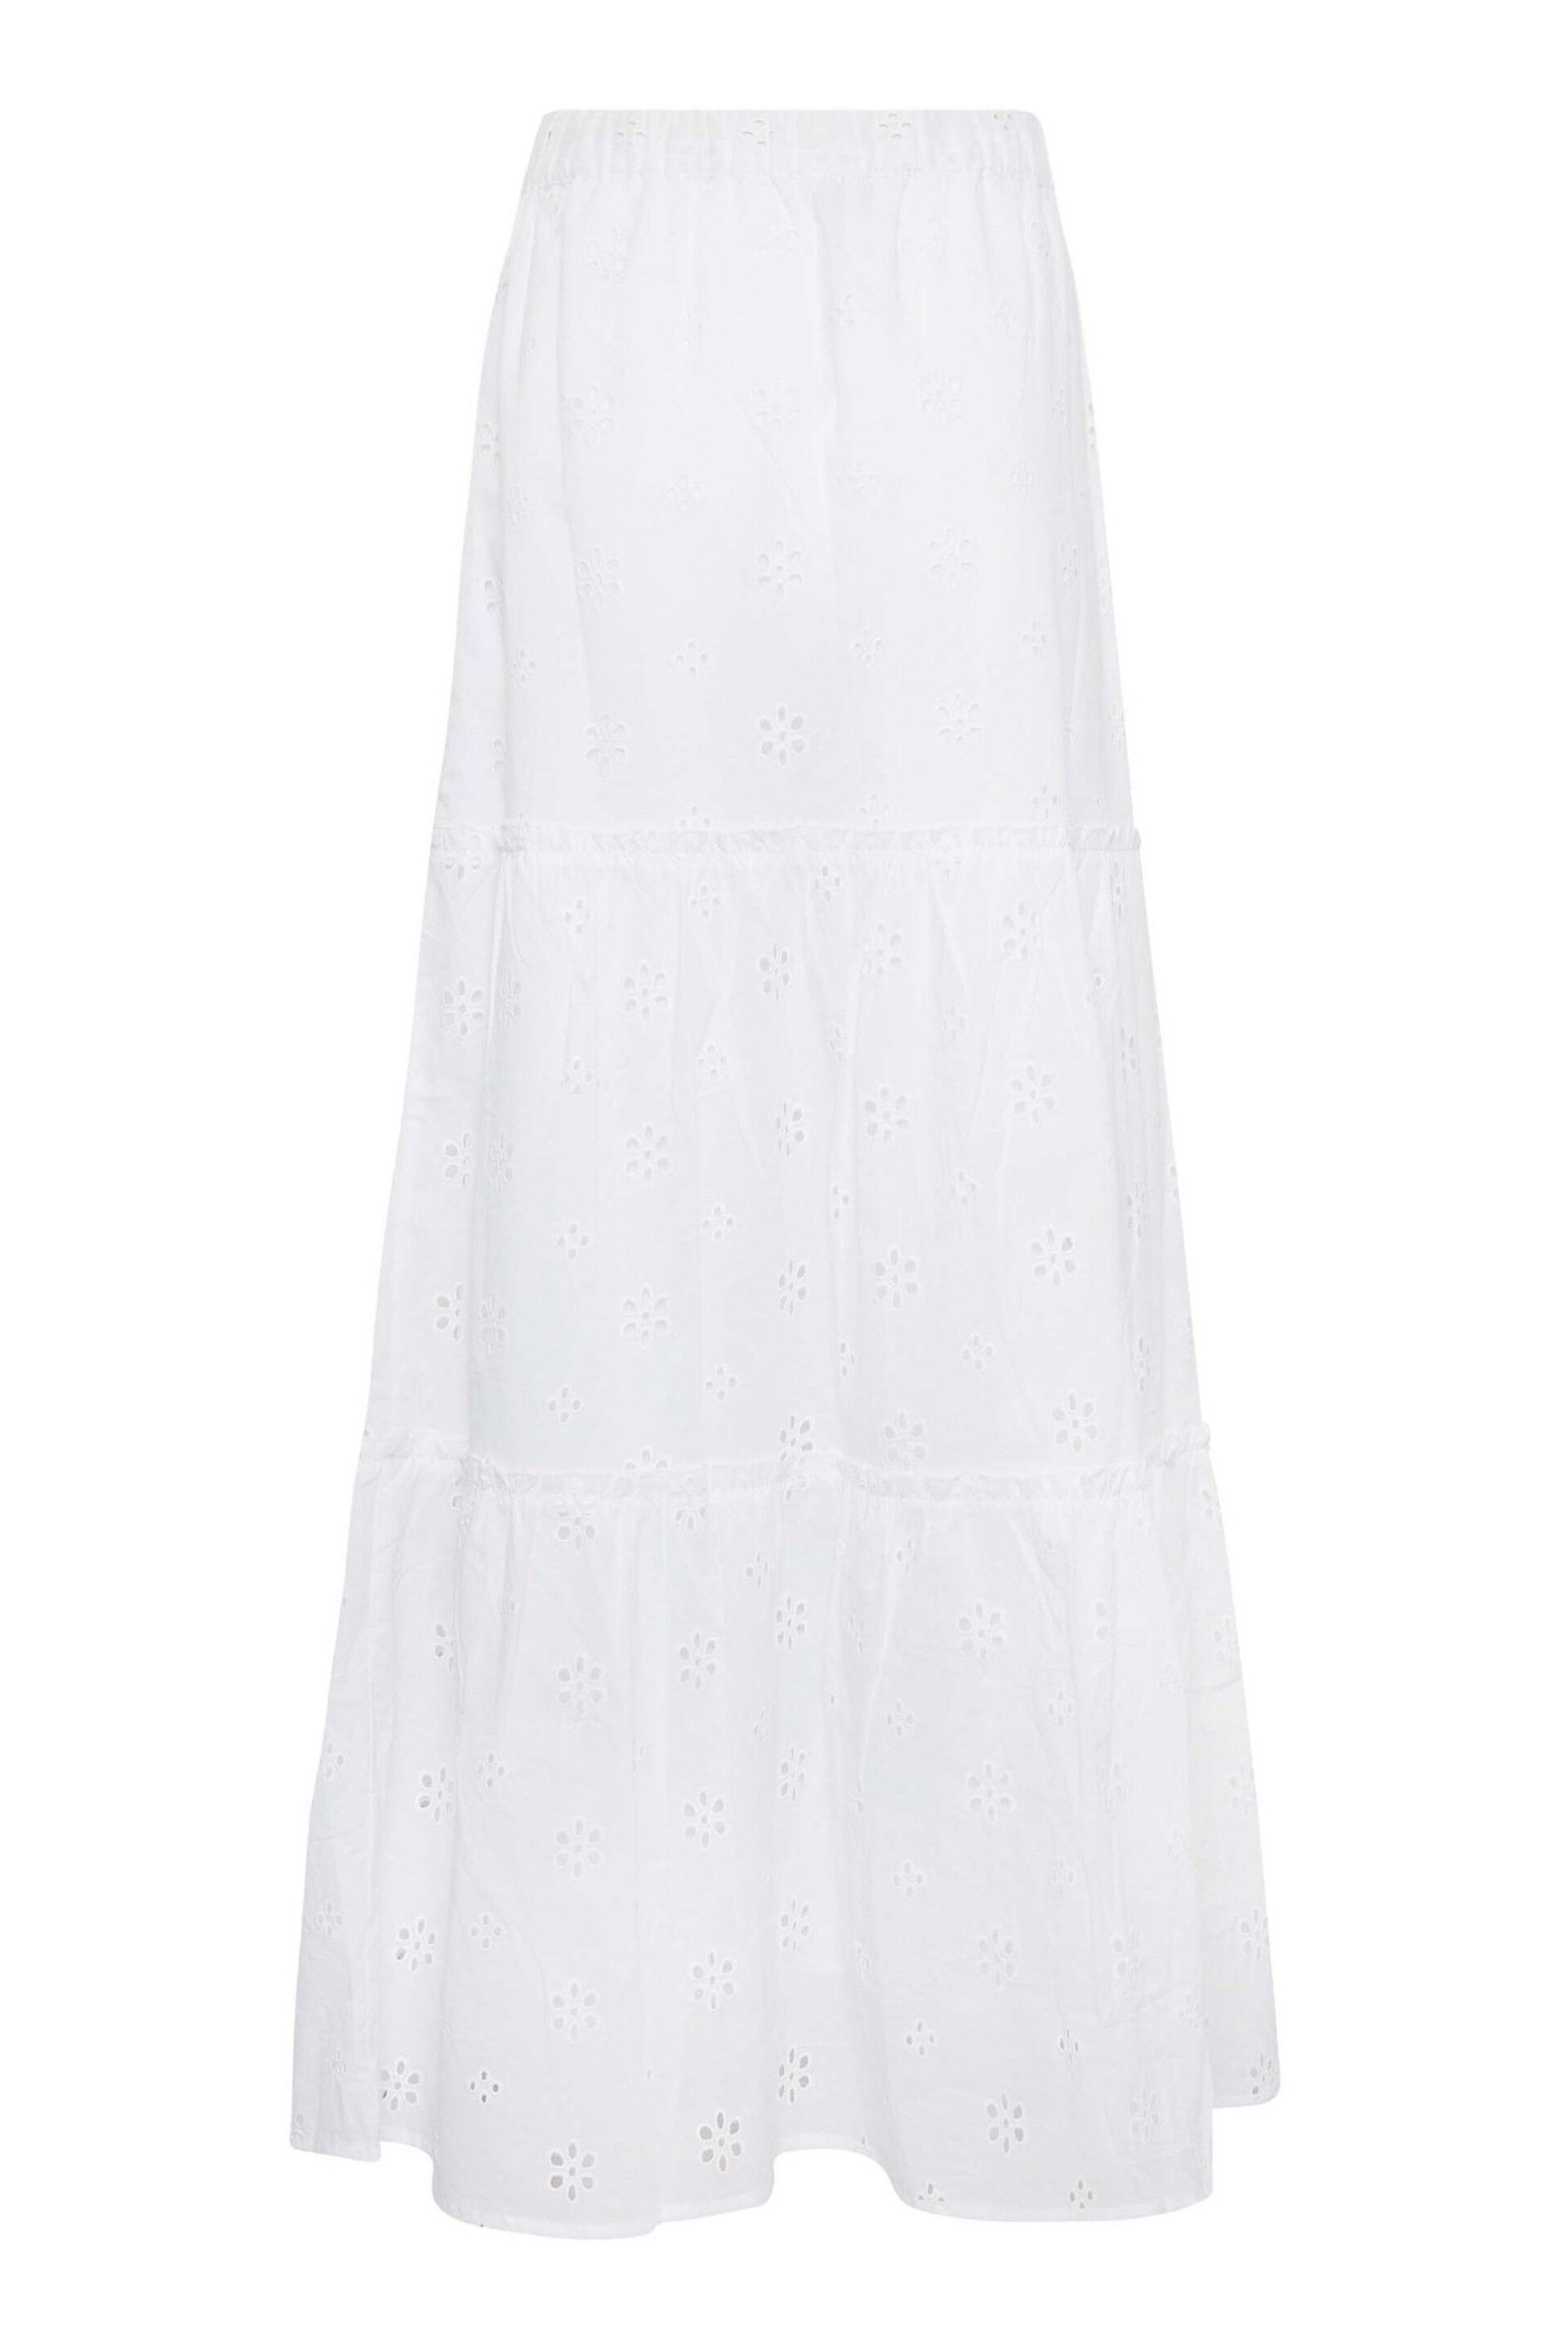 Long Tall Sally White Broderie Anglaise Tiered Maxi Skirt - Image 4 of 4